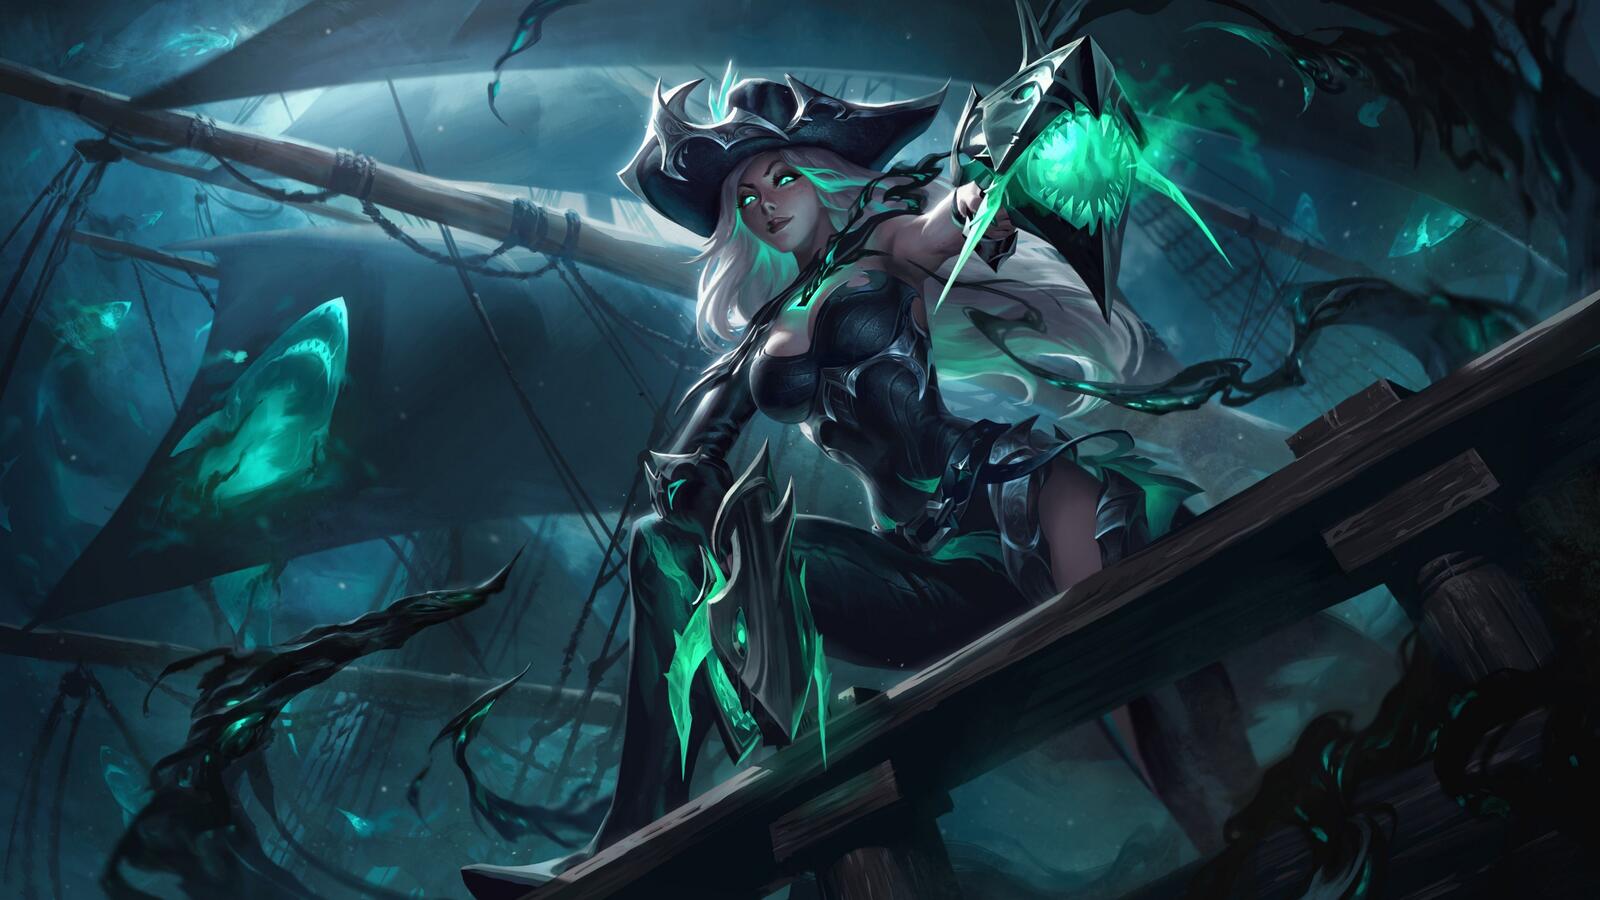 Free photo The green-eyed girl from the League Of Legends game